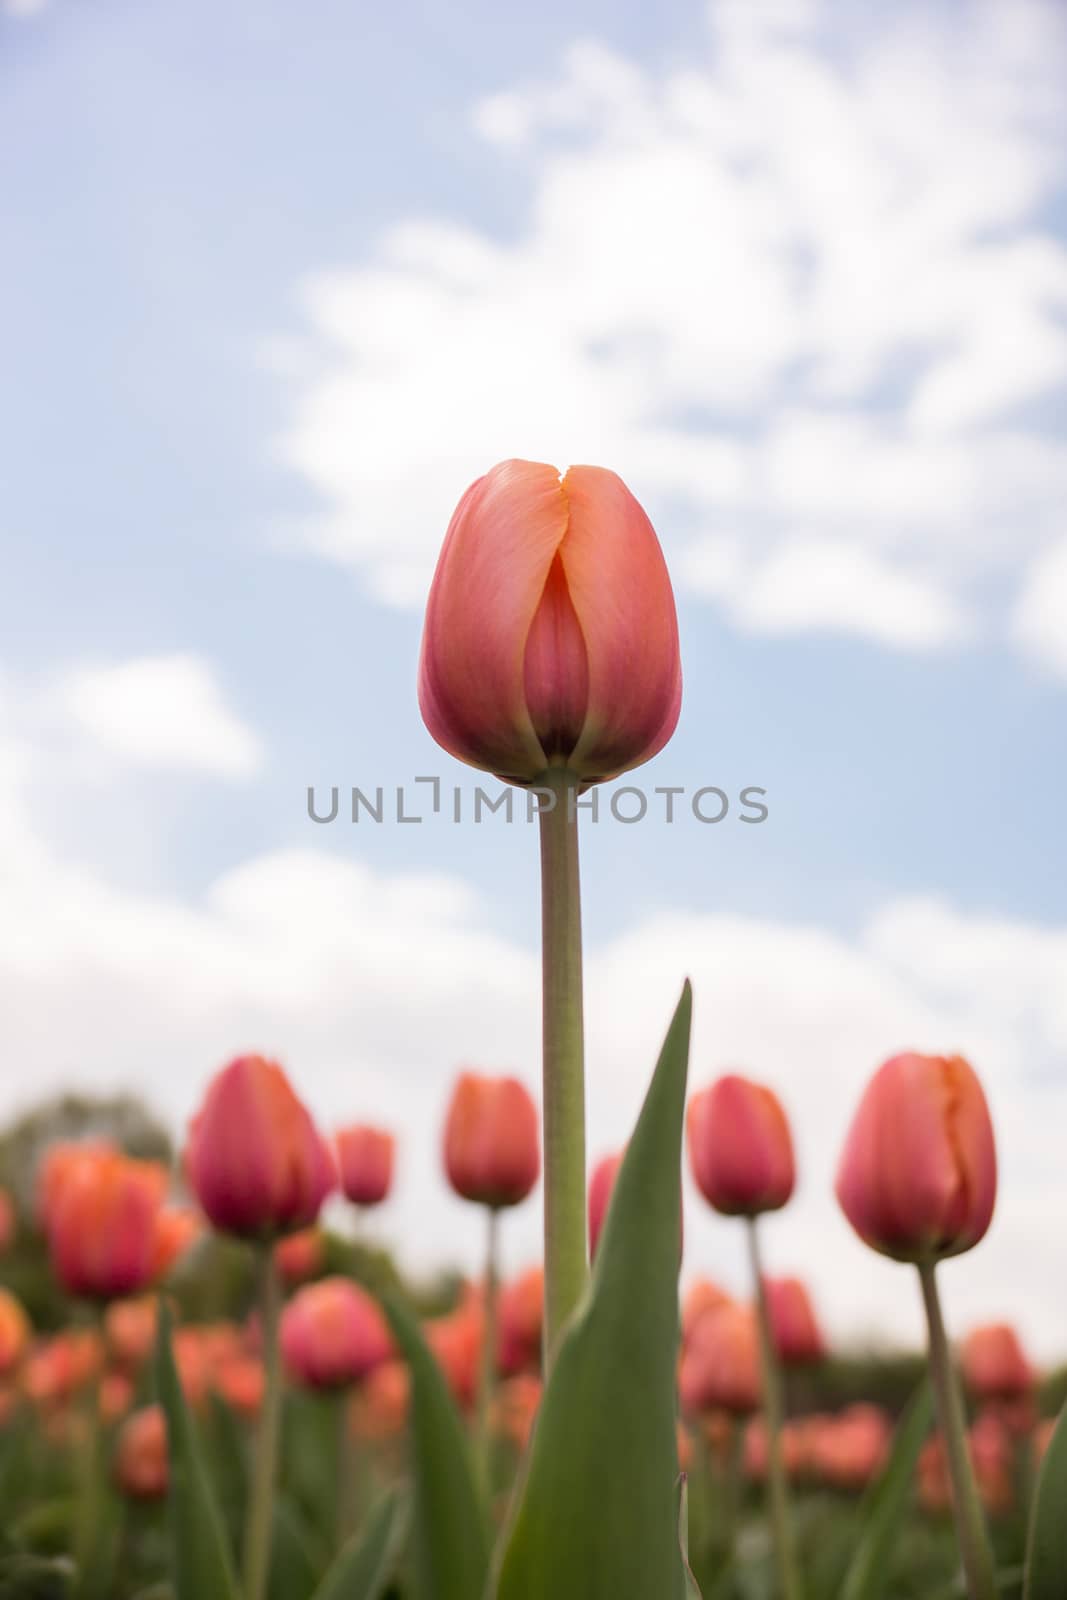 The photo shows a field of red tulips